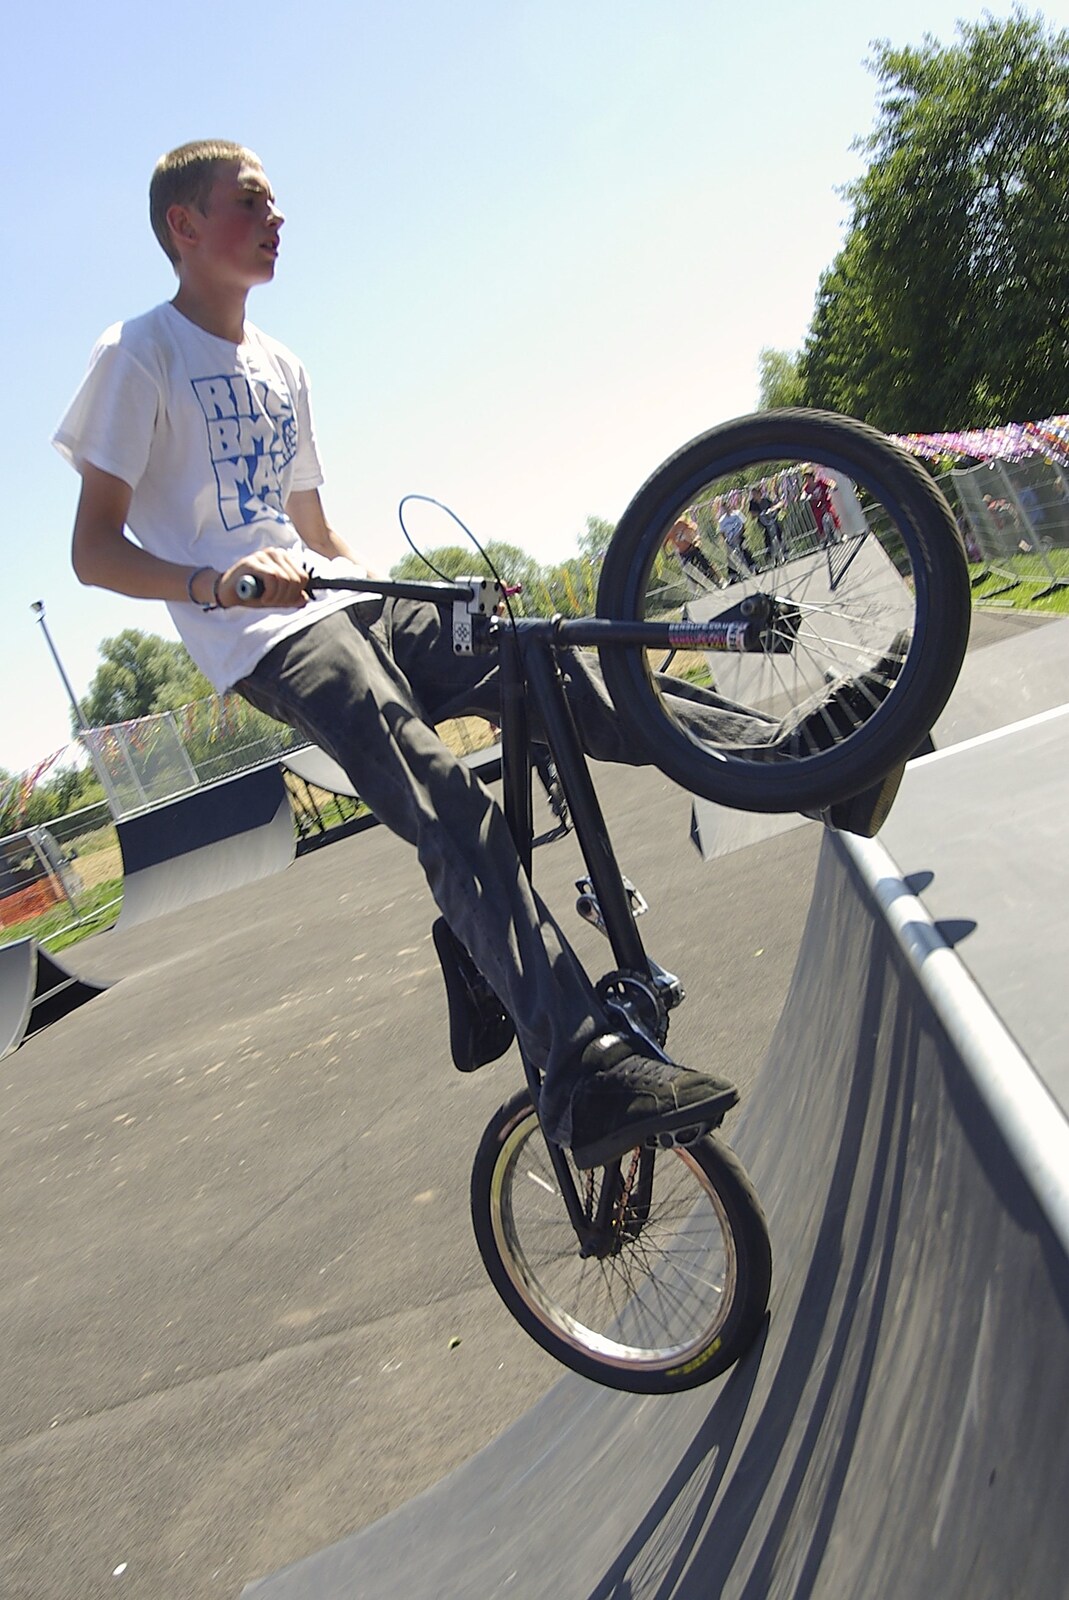 The Opening of Eye Skateboard Park, and The BBs at Cotton, Suffolk - 5th August 2007: BMX in action